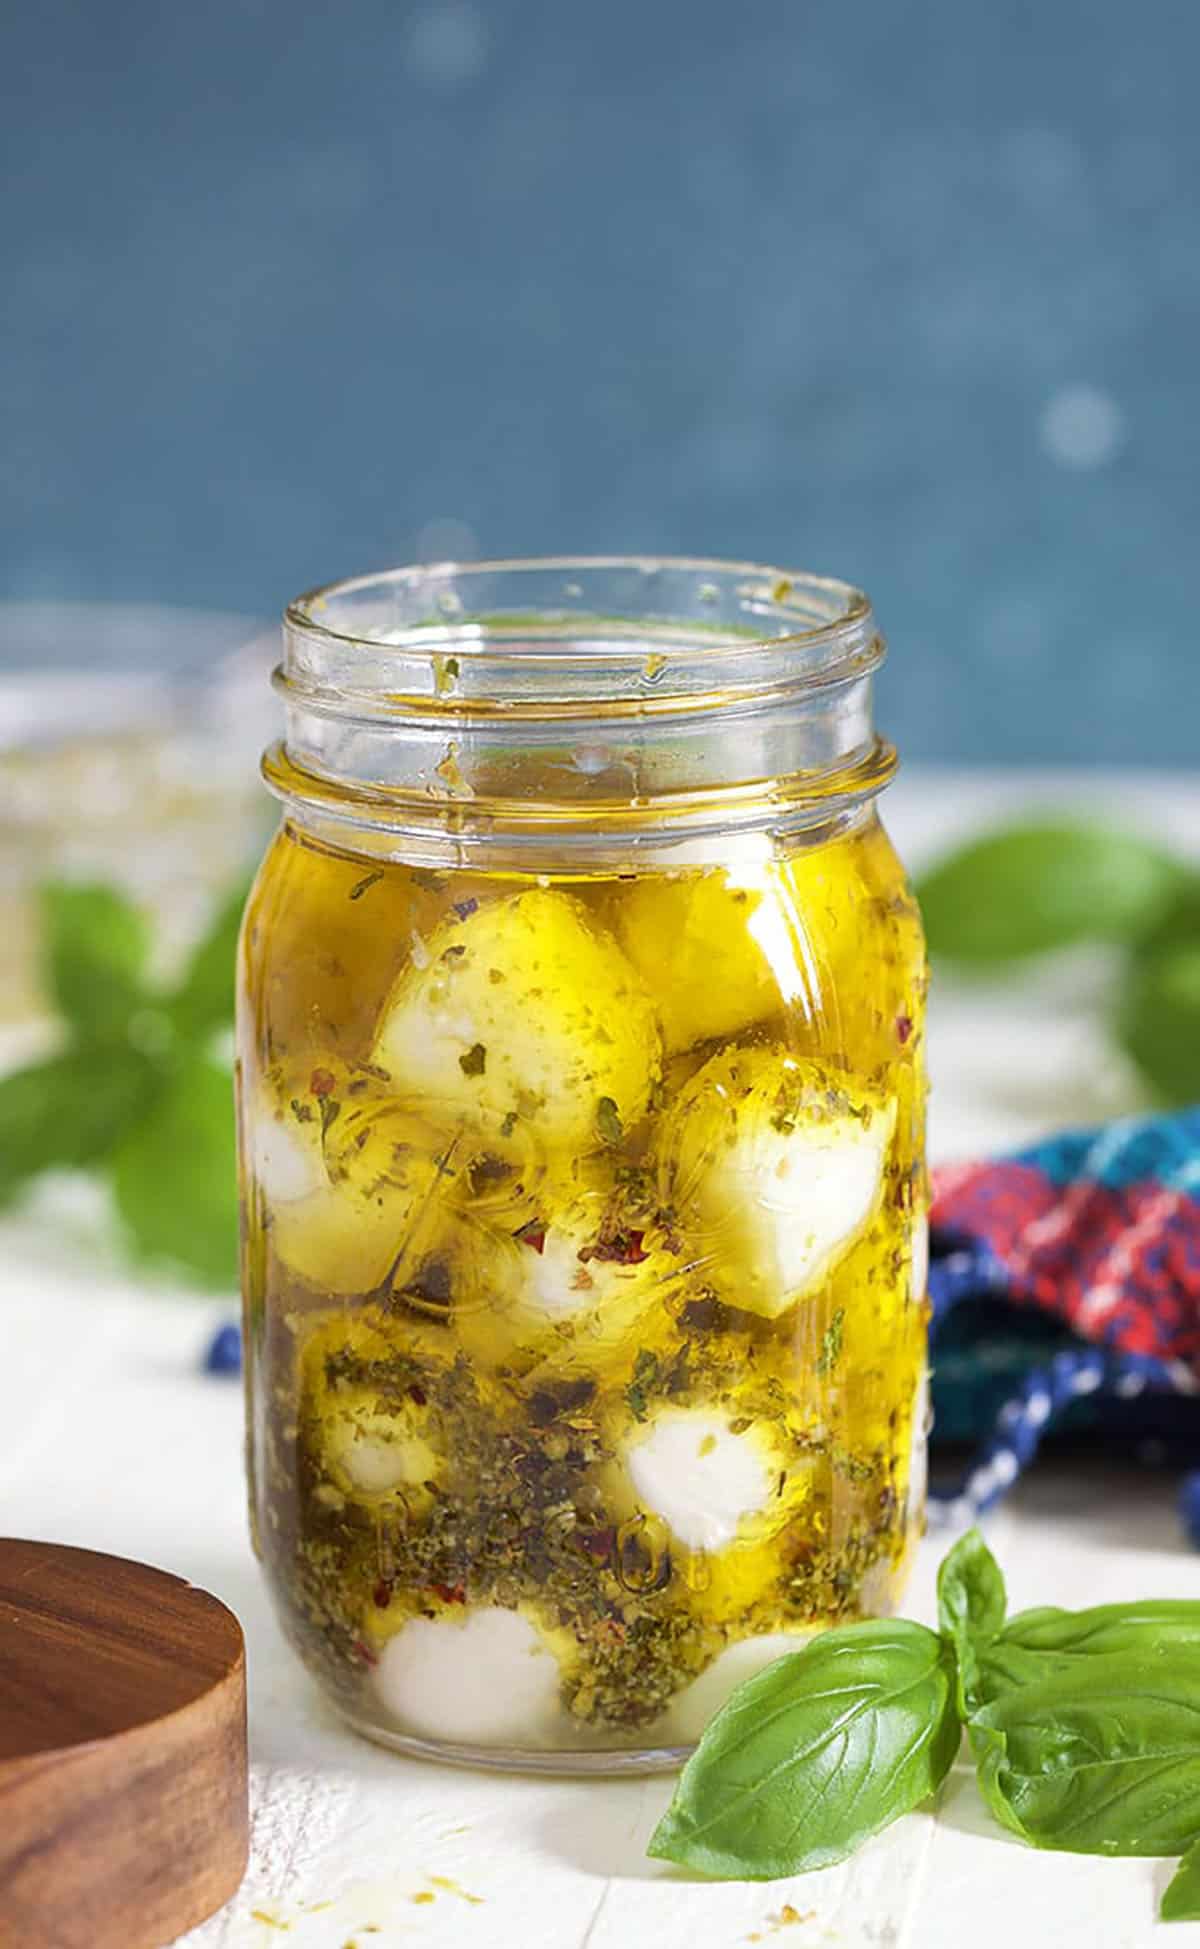 Marinated Mozzarella Balls in a jar with olive oil on a white background with basil leaves.